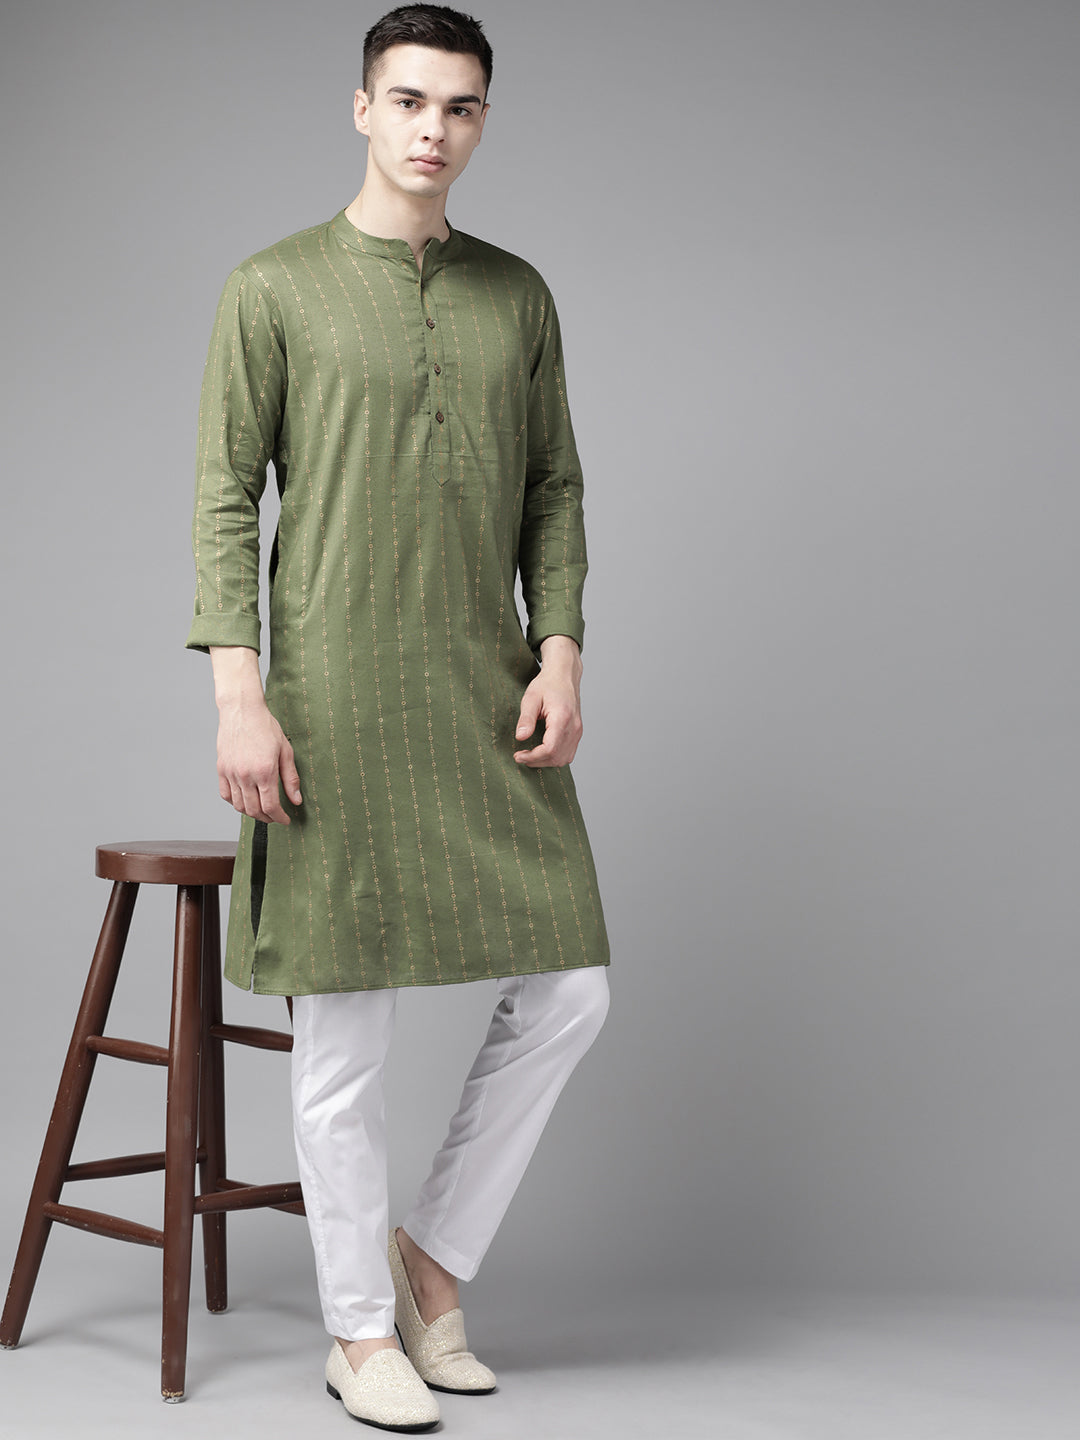 Know, why the Cambric kurta for men is in trend?